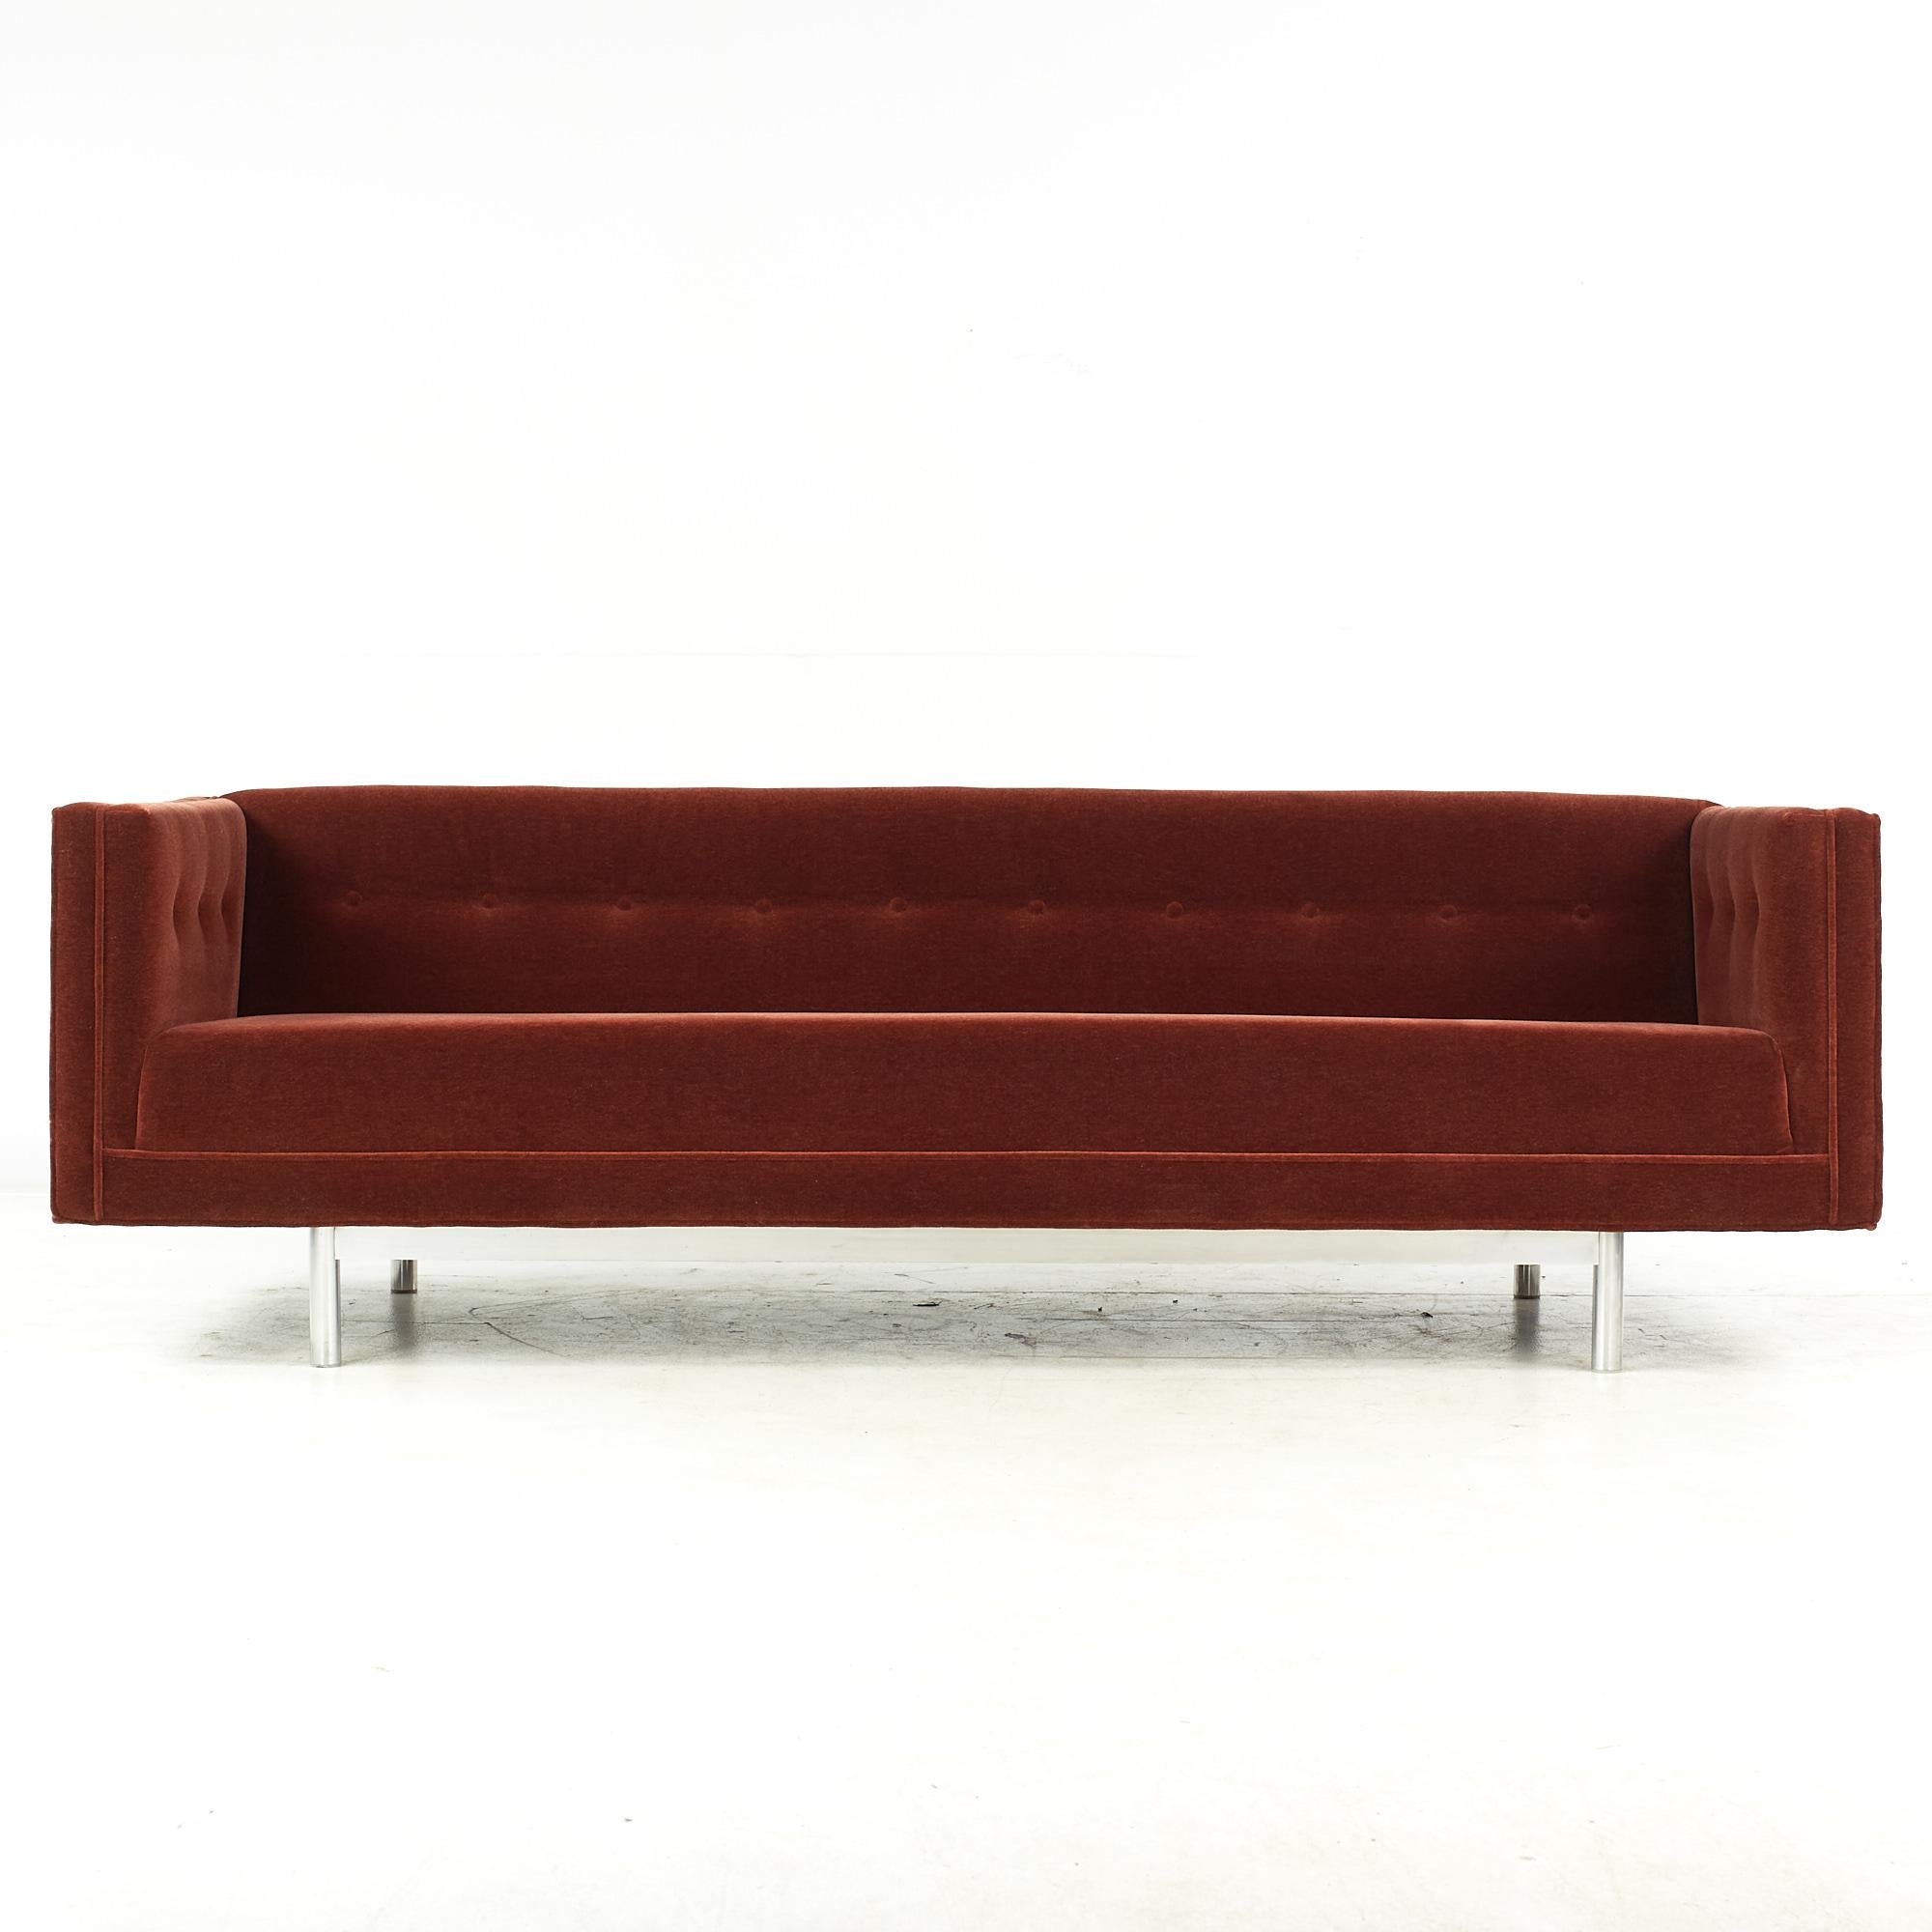 Jack Cartwright mid century chrome and mohair sofa

This sofa measures: 86.5 wide x 32.5 deep x 26.75 inches high, with a seat height of 16 and arm height of 26.75 inches

All pieces of furniture can be had in what we call restored vintage